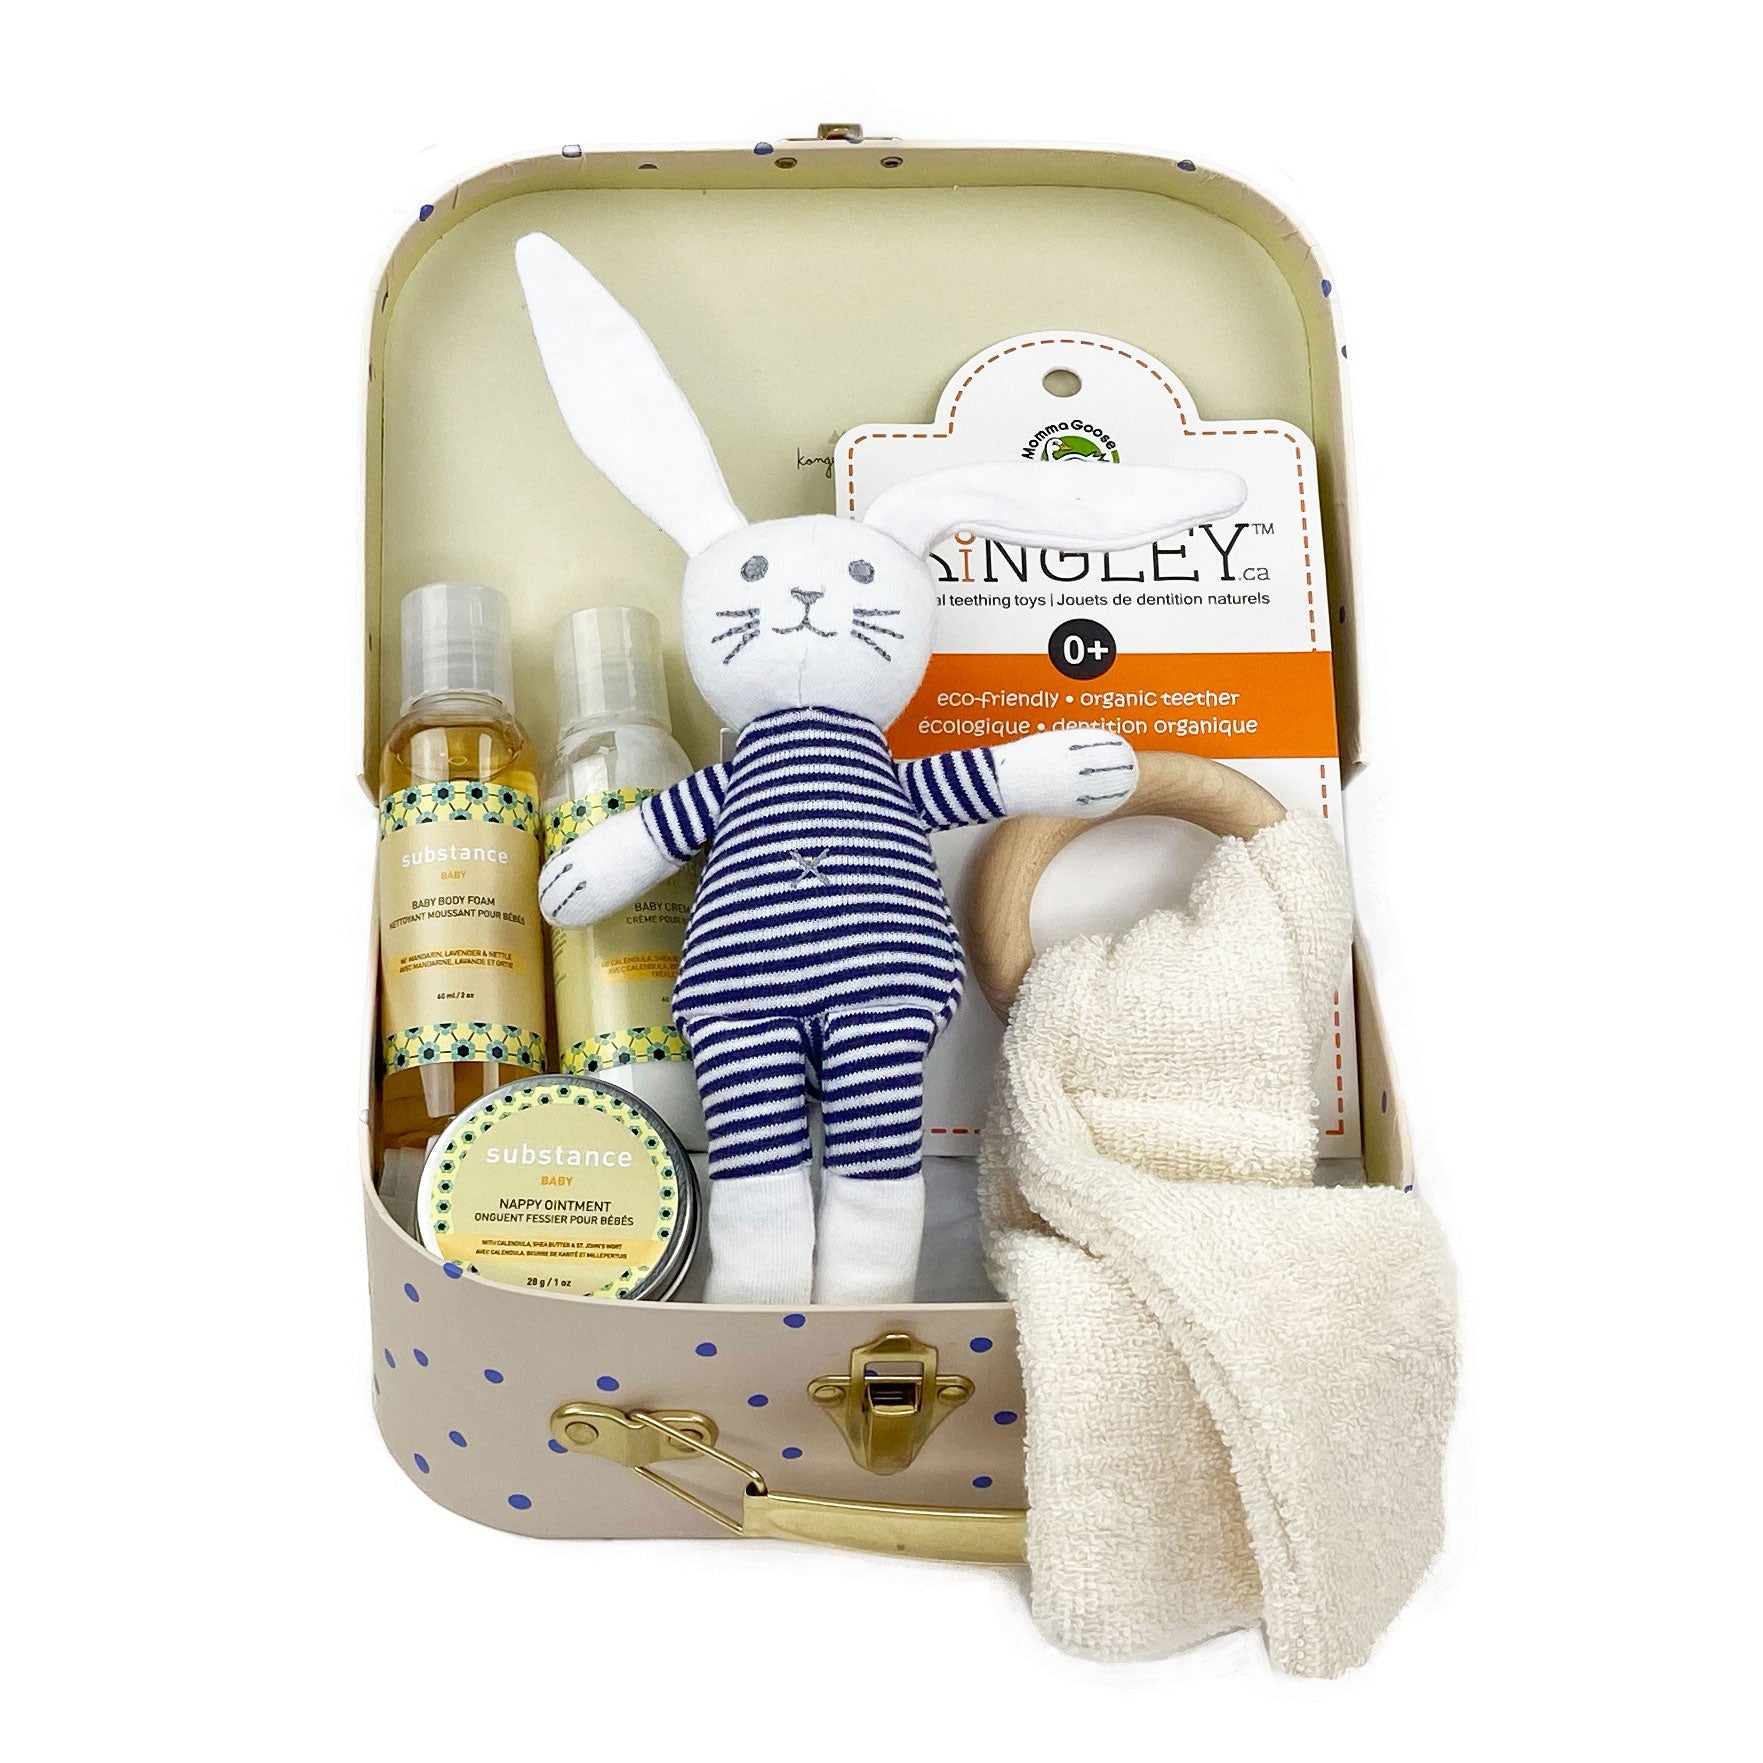 Gender neutral baby gift box featuring a bunny rattle, a terry teether and a travel size of baby skin care presented in Konges Luggage